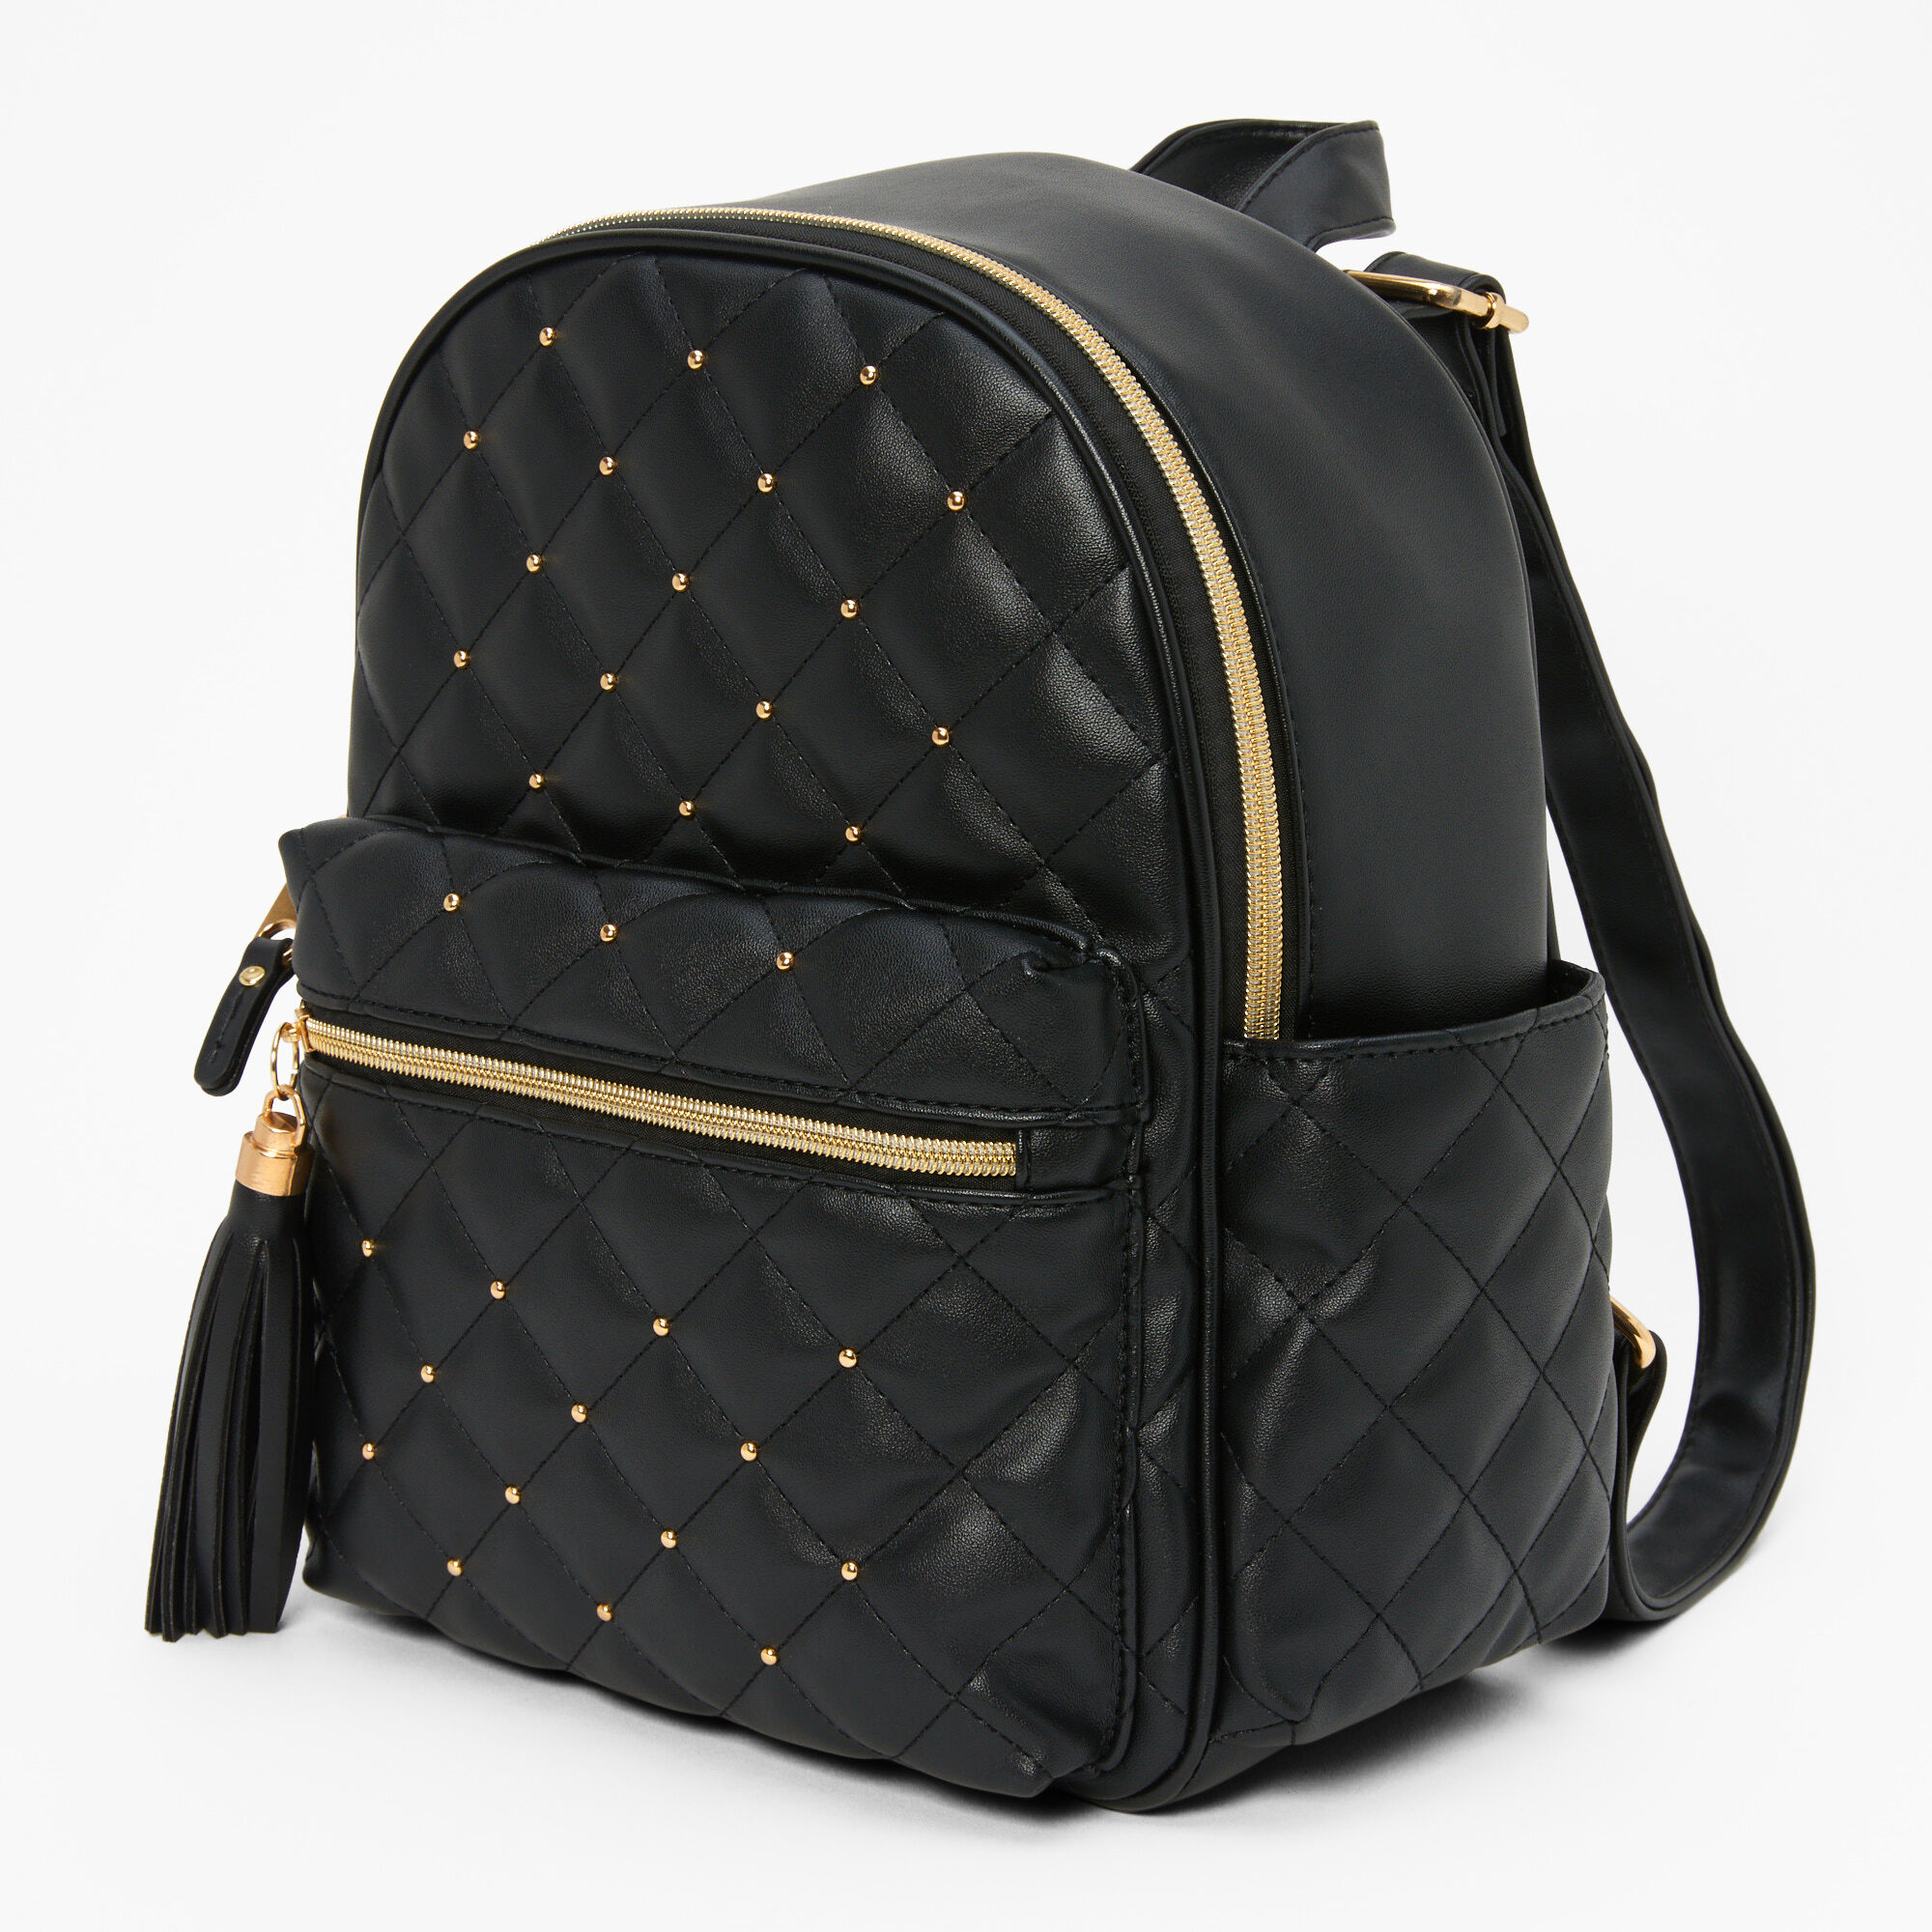 View Claires Faux Leather Gold Pearl Studded Mini Backpack Black information